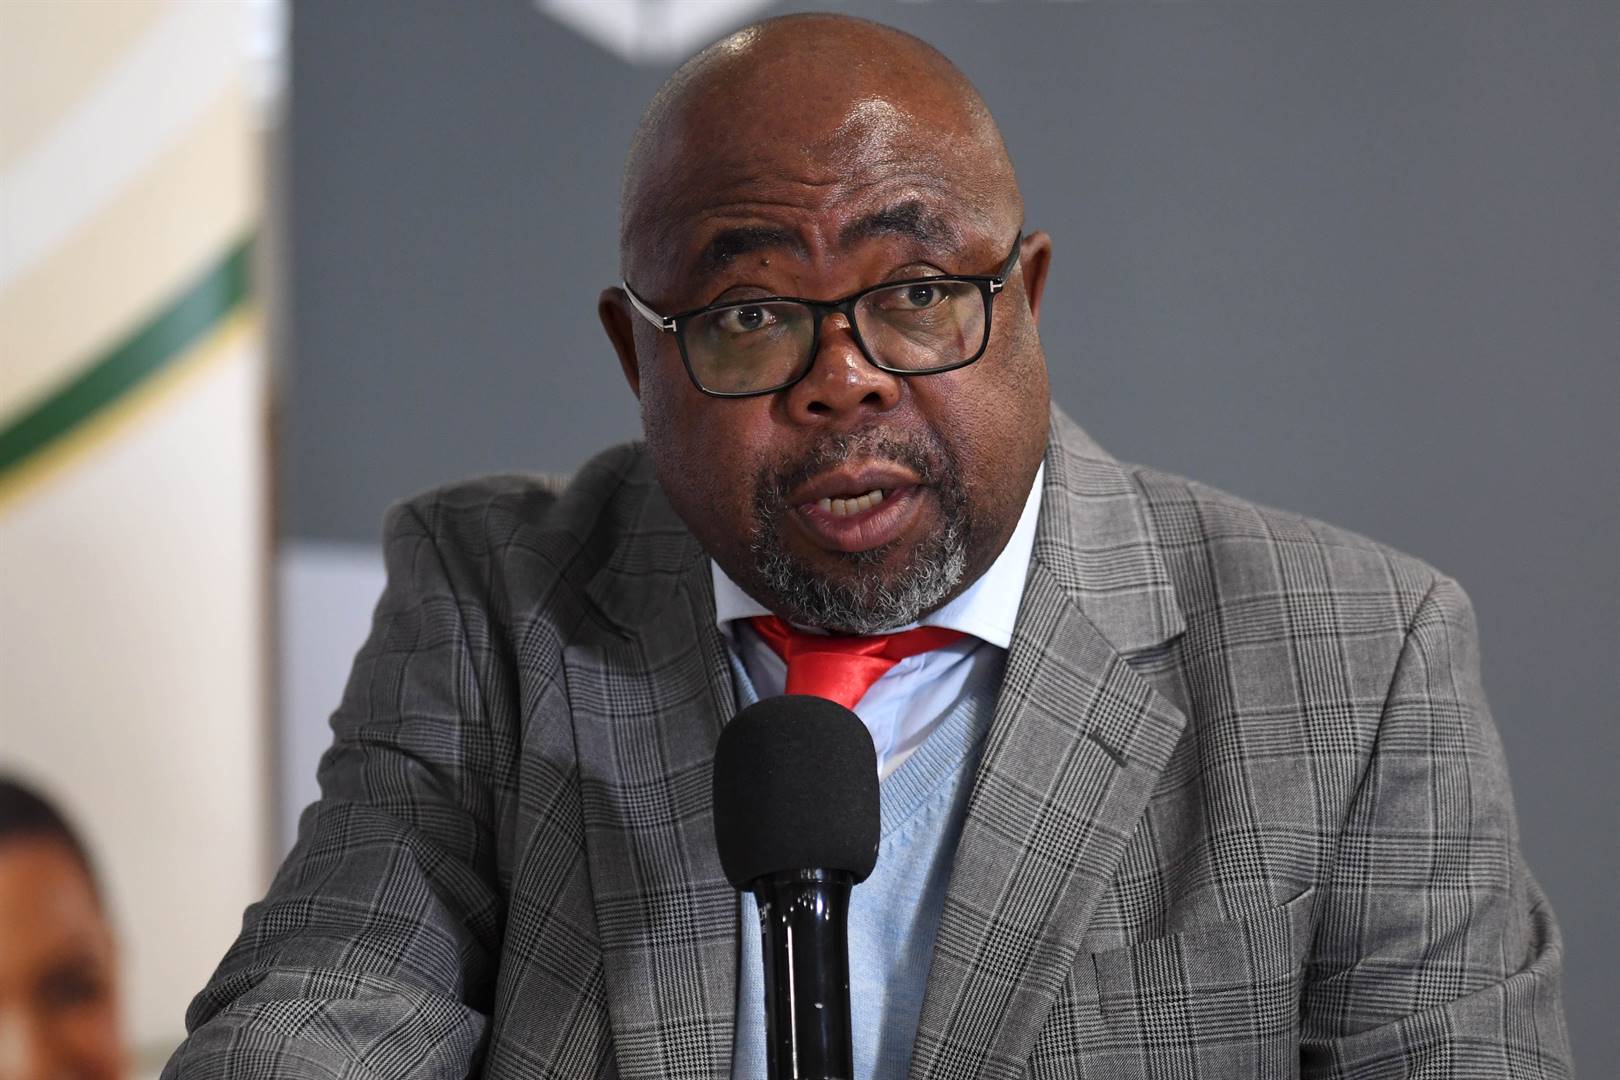 Thulas Nxesi, Minister of Labour and Employment, is heading to court to set aside a controversial "job-creation" scheme